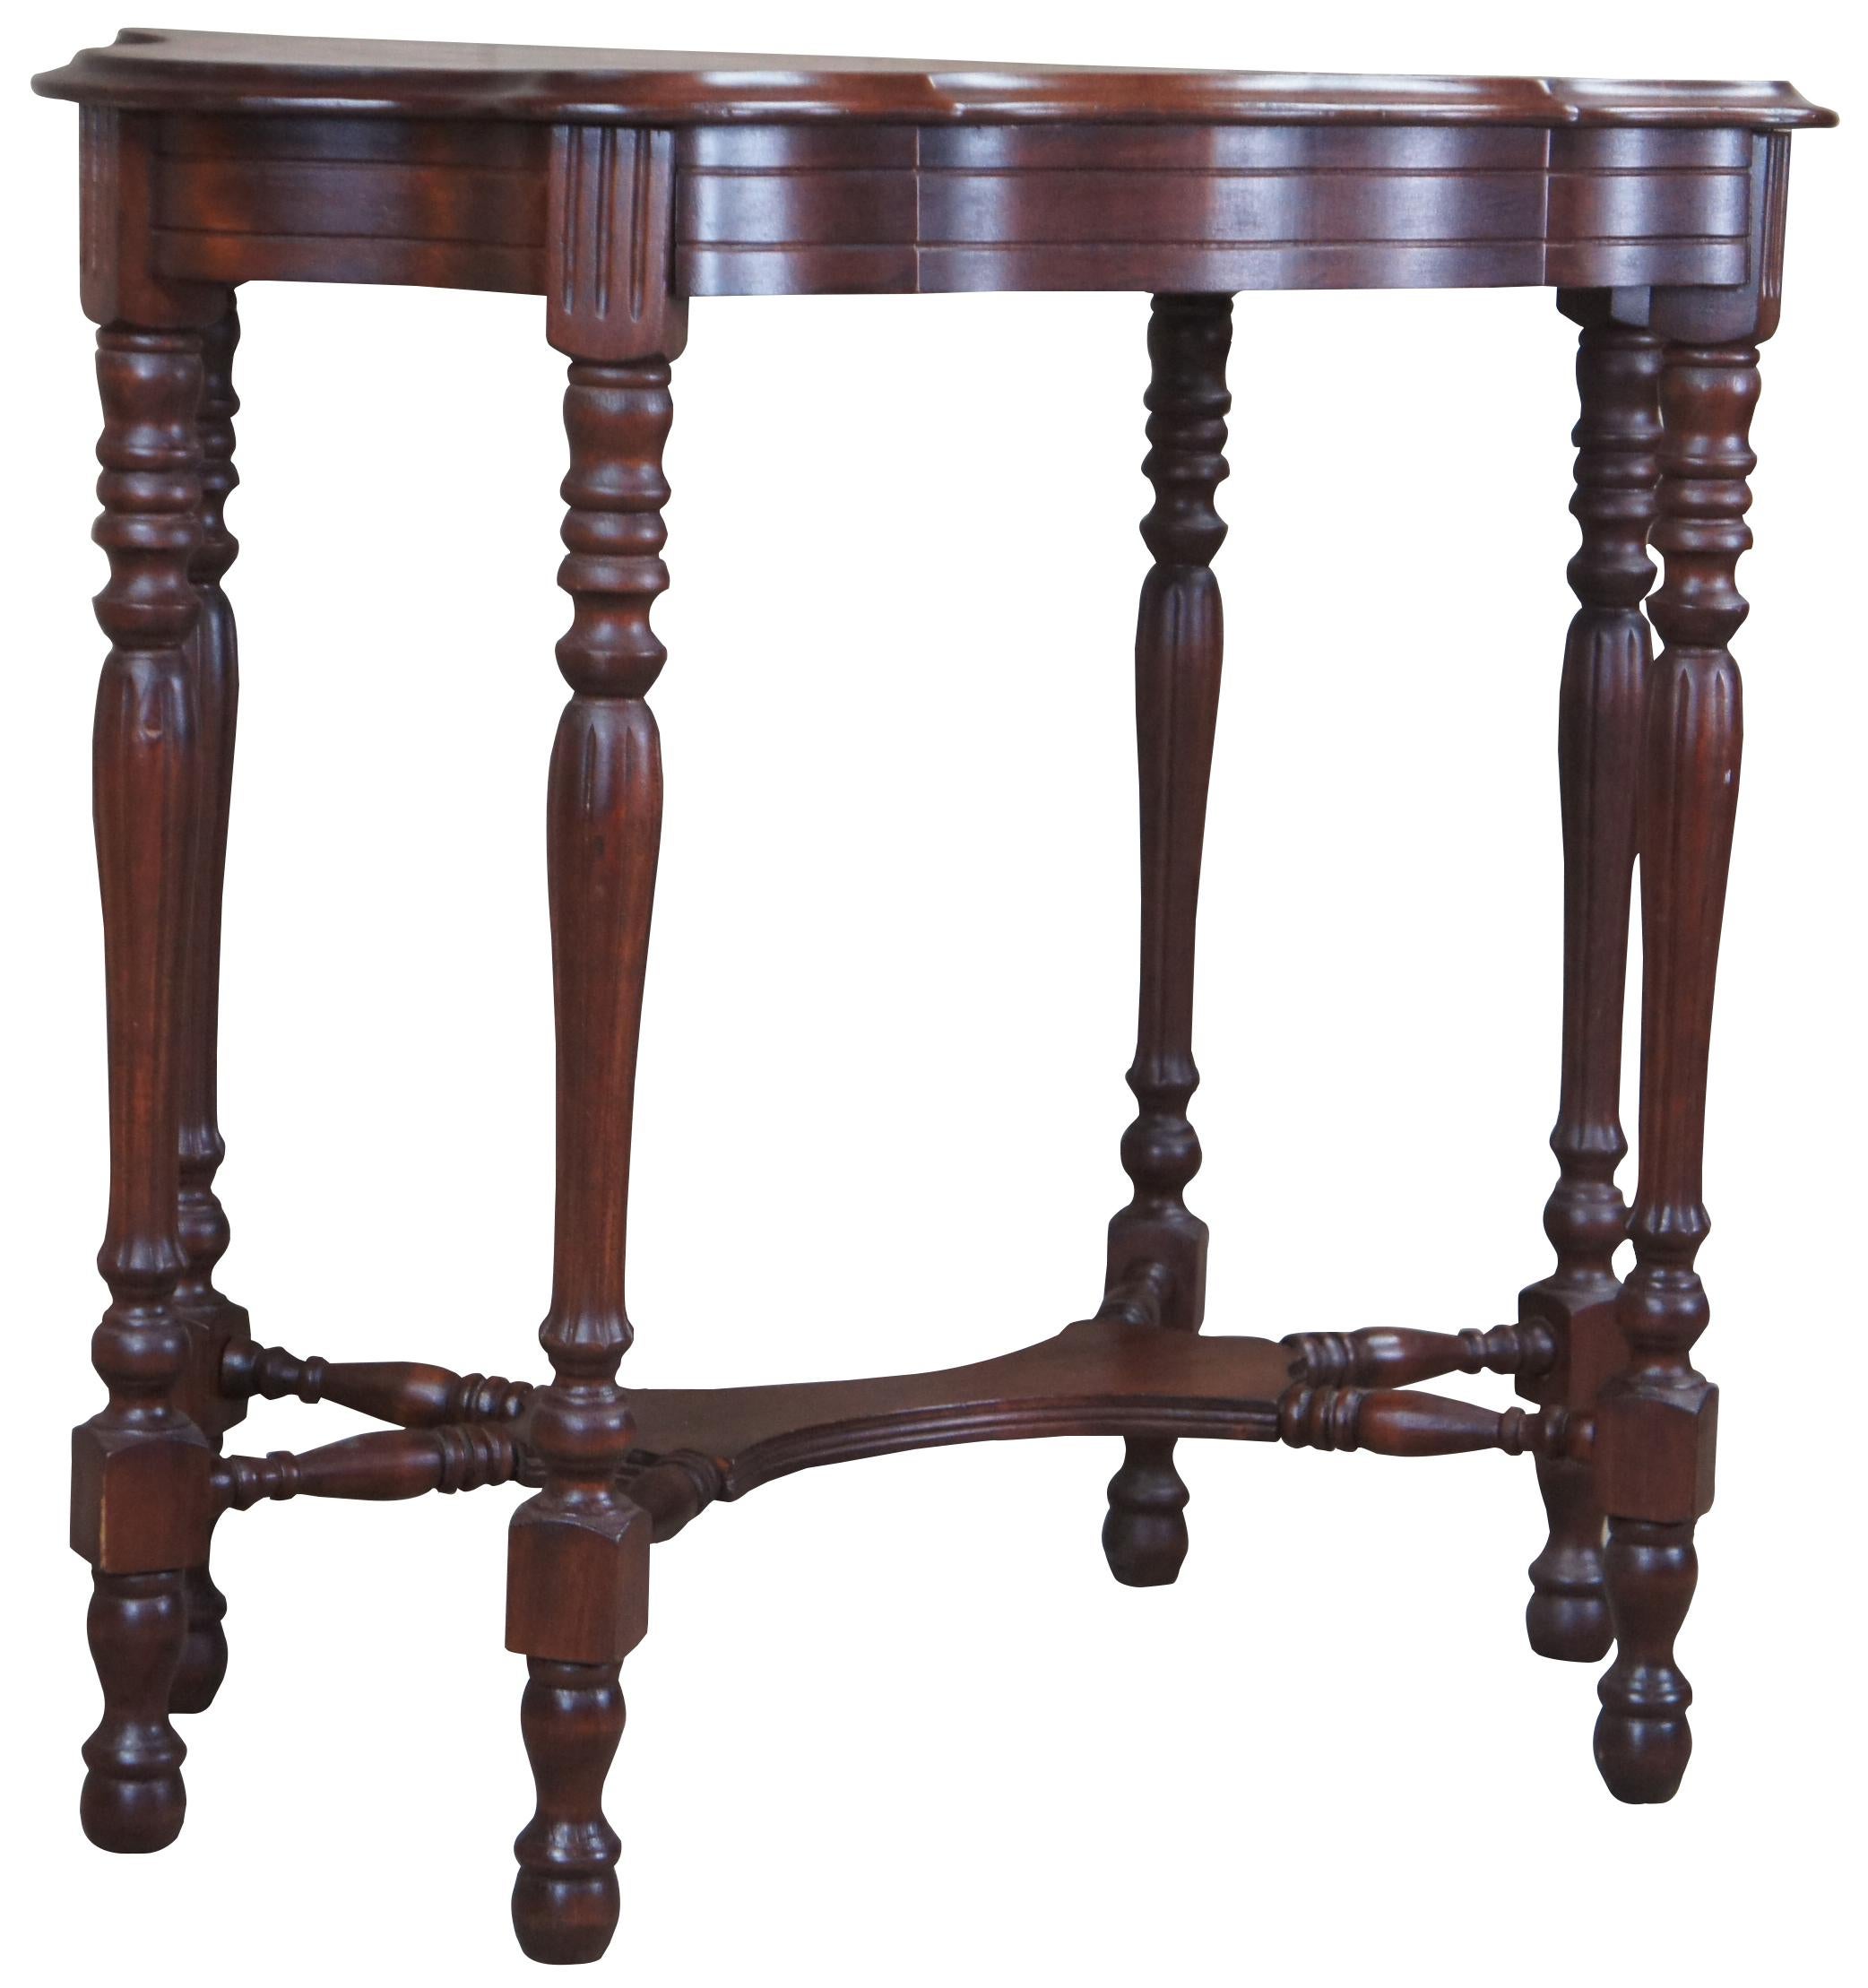 Vintage Jacobean turtle top side table. Made of walnut with scalloped shape with ogee edge. The table is supported by six turned legs tapering fluted legs connected by a turned stretcher and nubby feet.
 